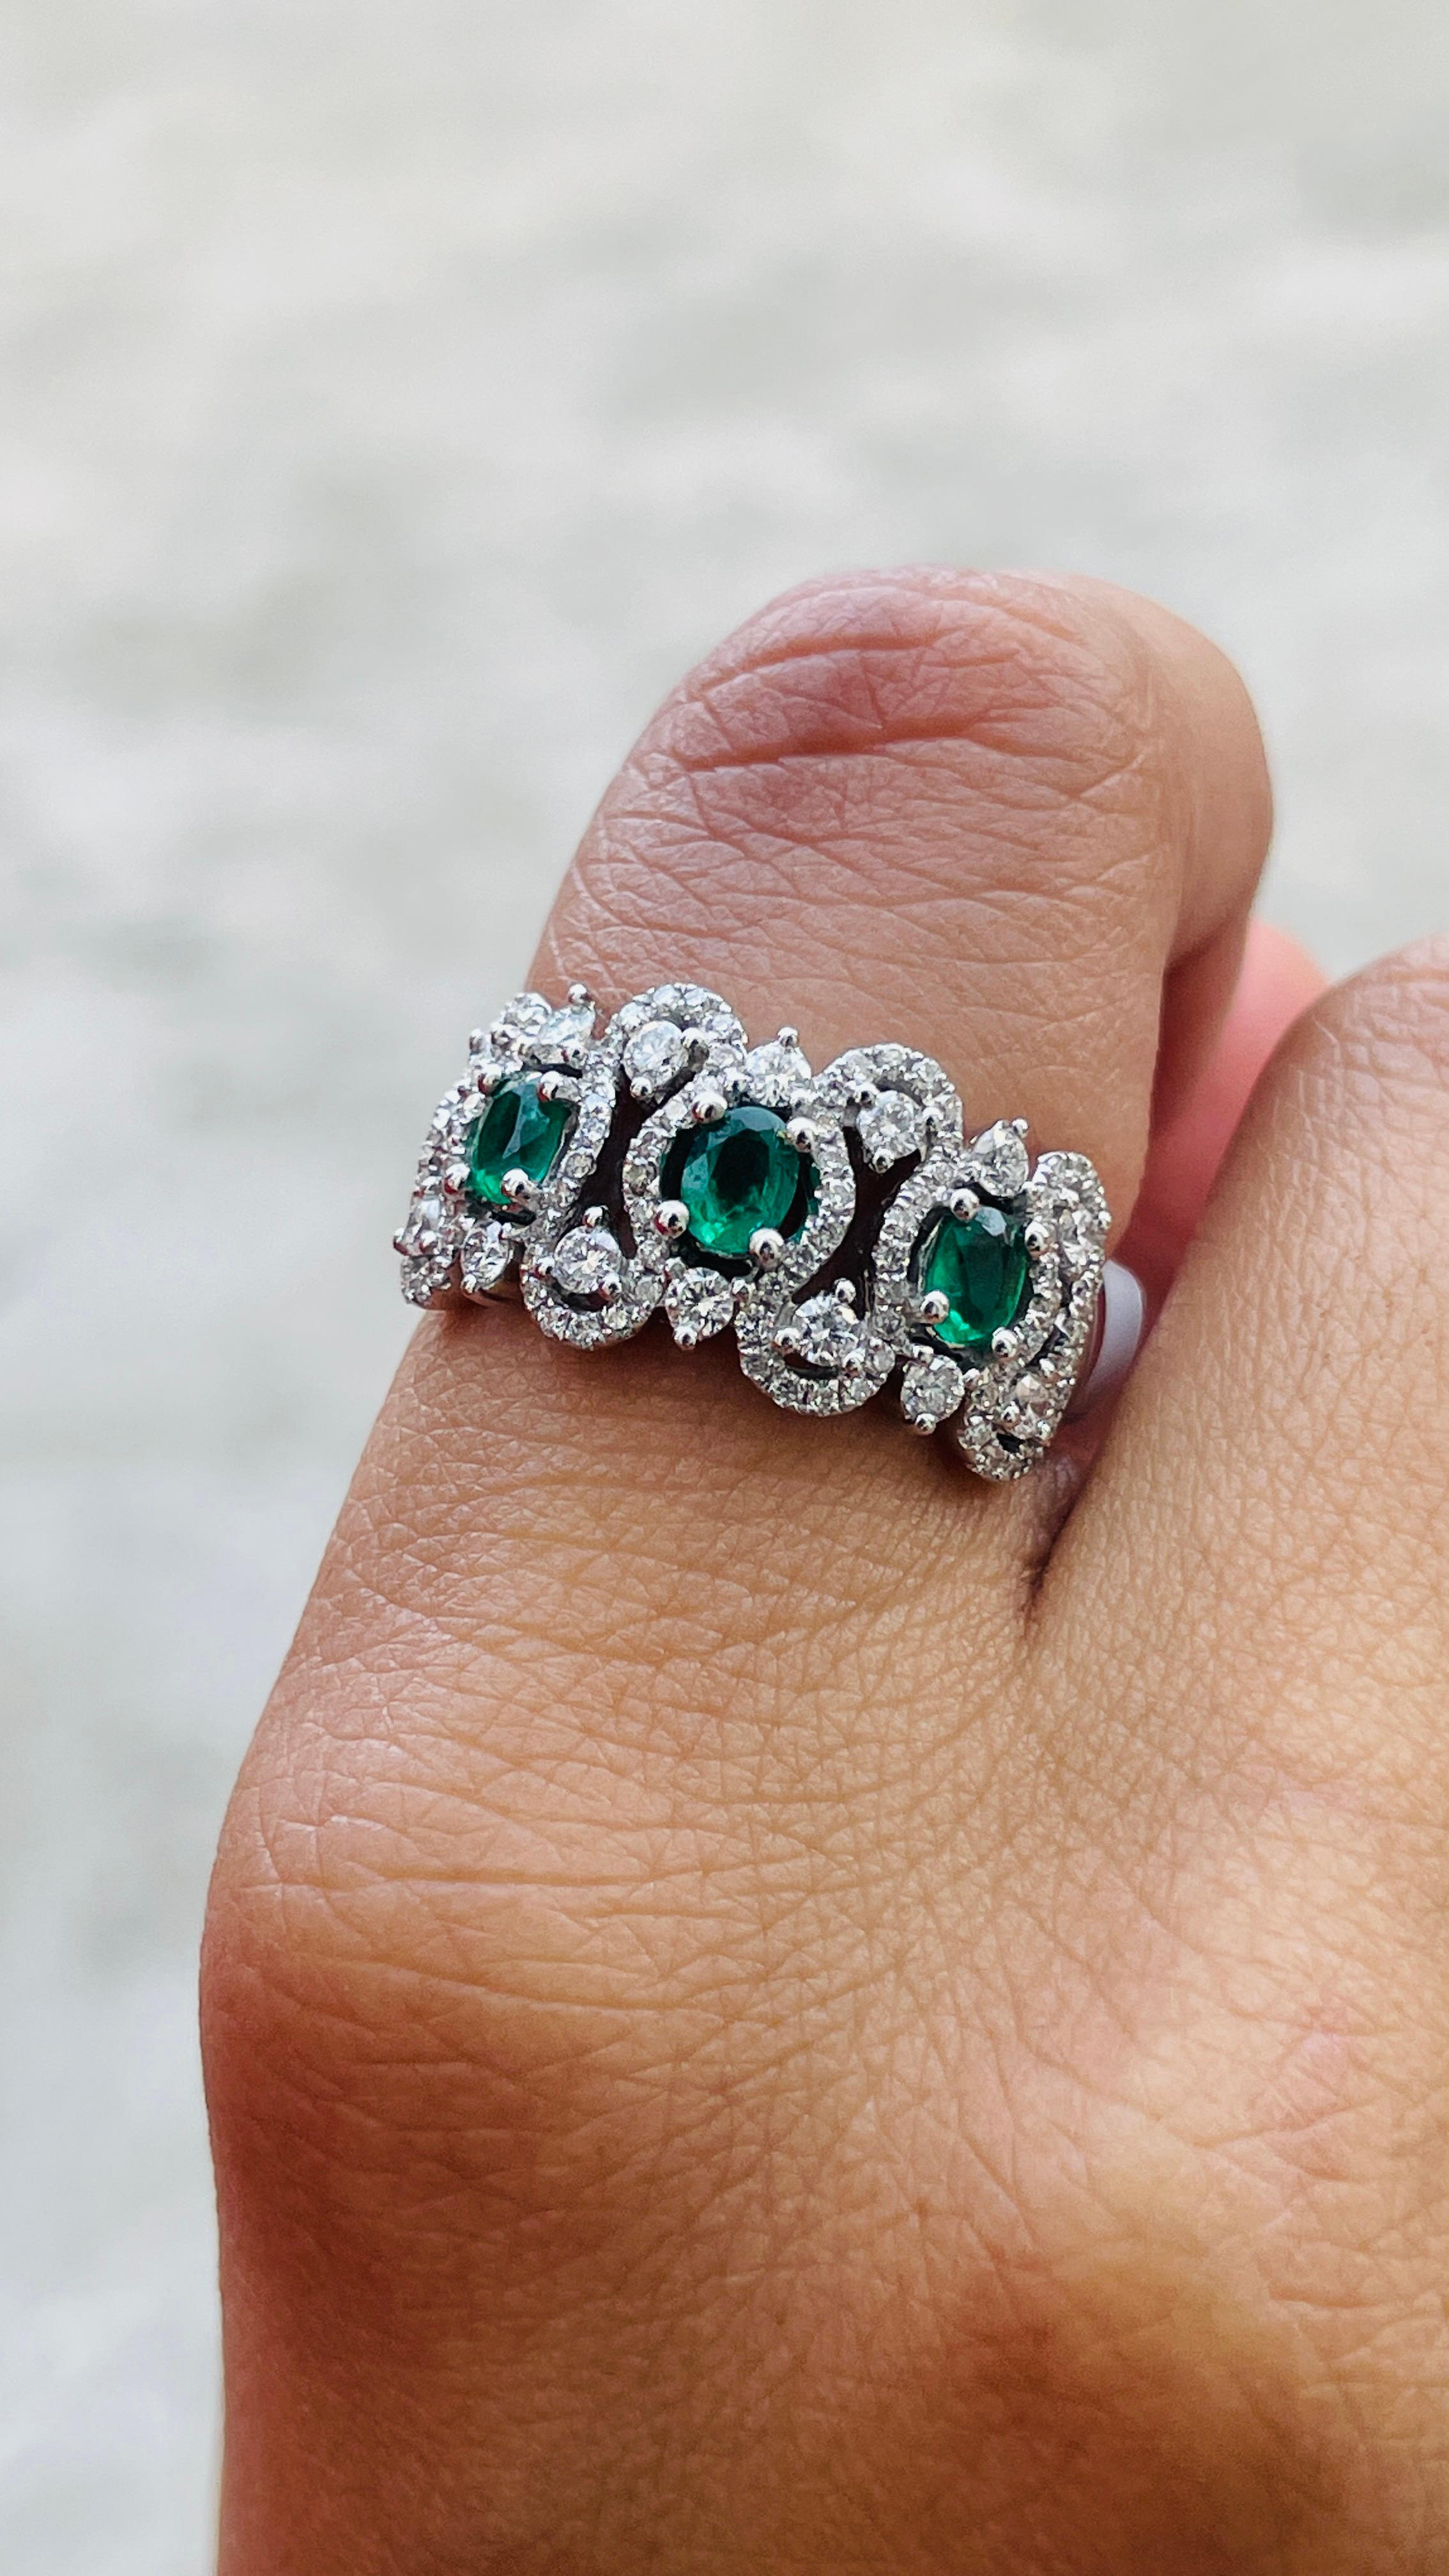 For Sale:   Diamond and Natural Emerald Engagement Band Ring in 14k Solid White Gold 8